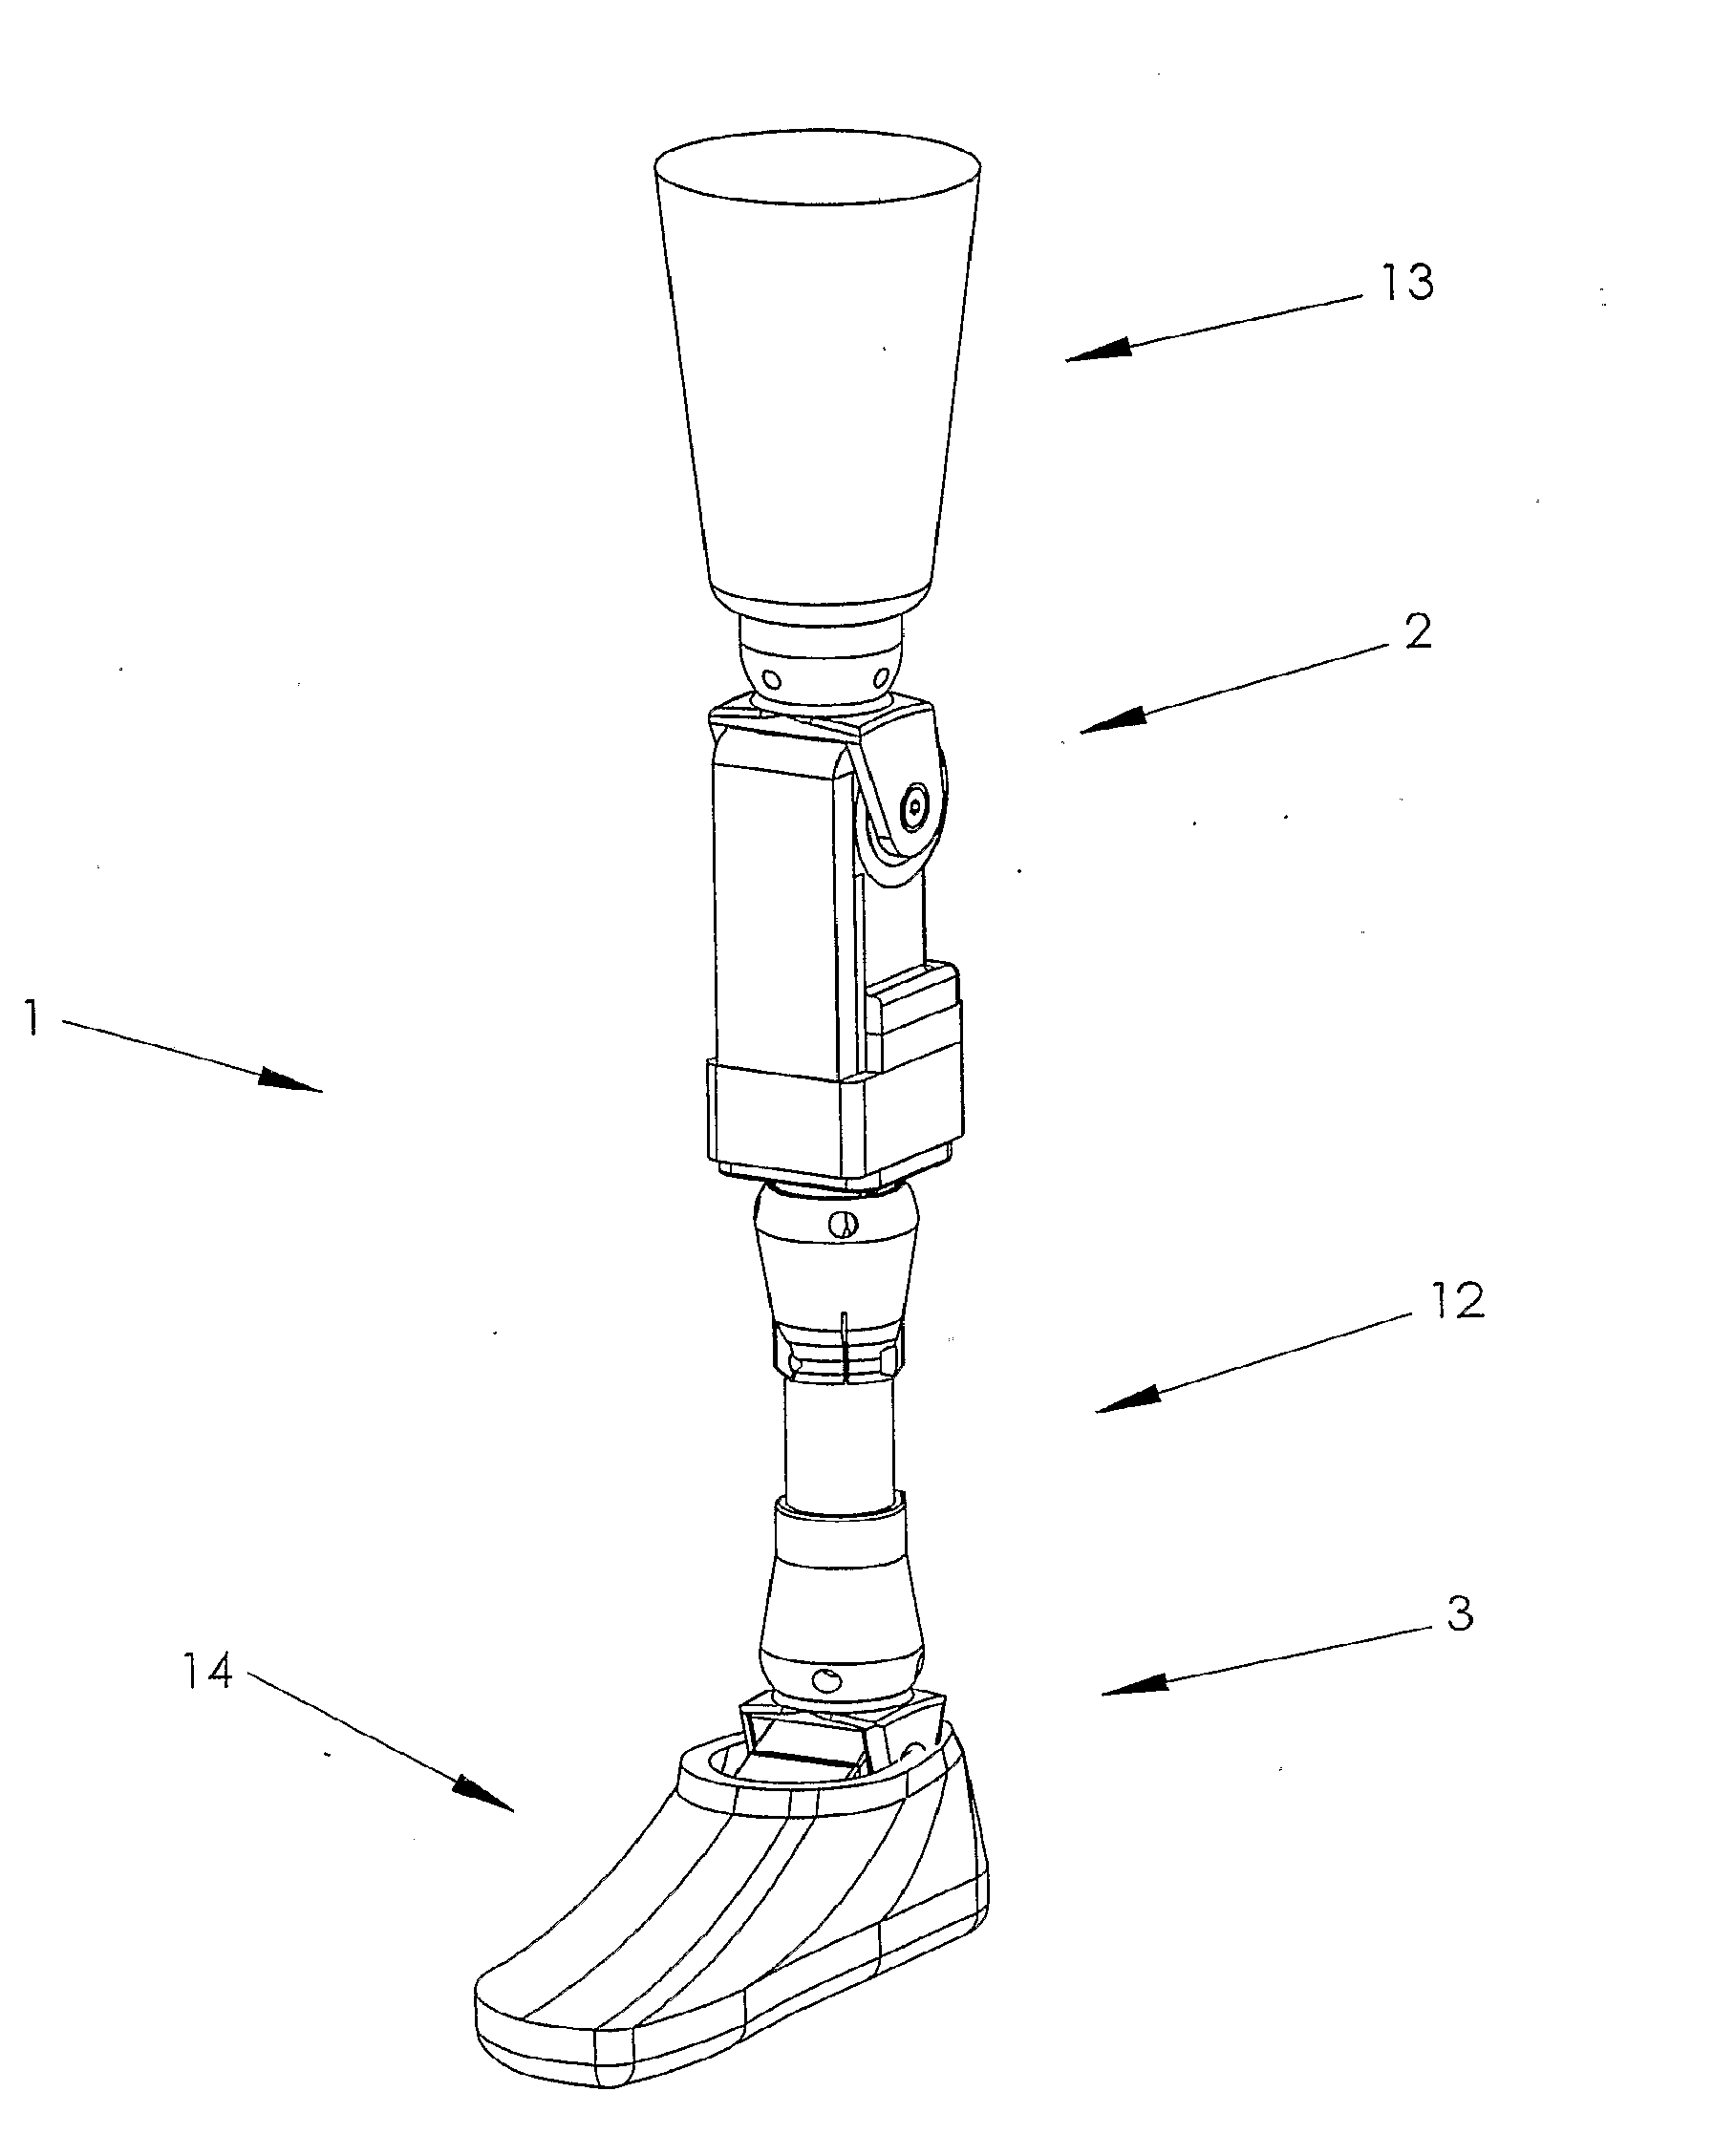 Combined active and passive leg prosthesis system and a method for performing a movement with such a system